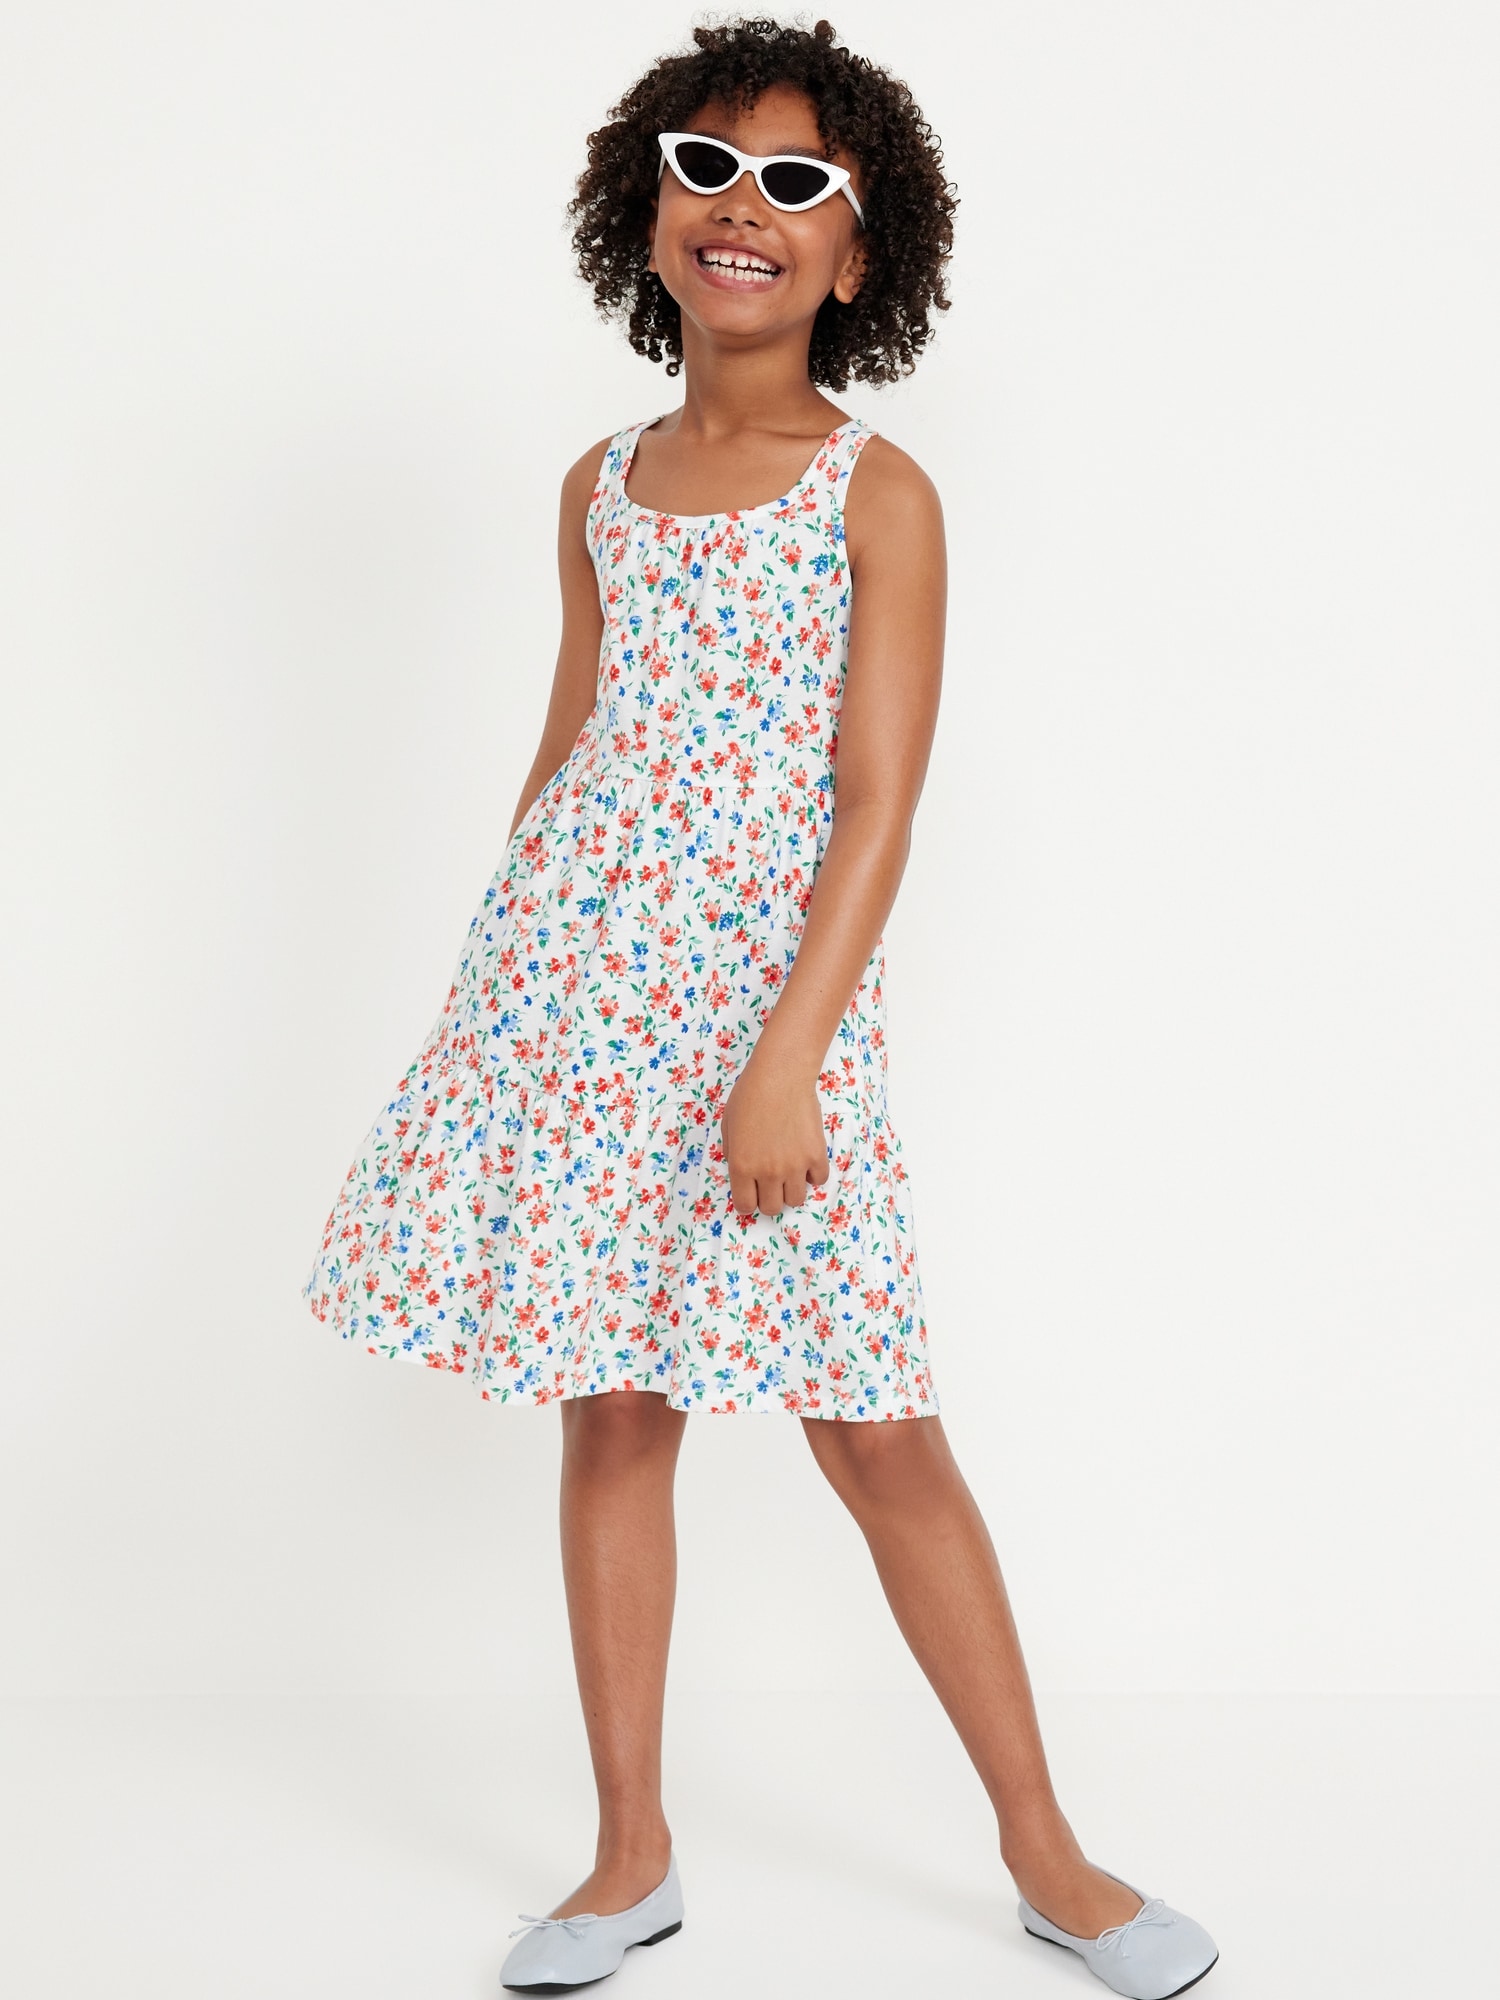 Printed Sleeveless Tiered Dress for Girls Hot Deal